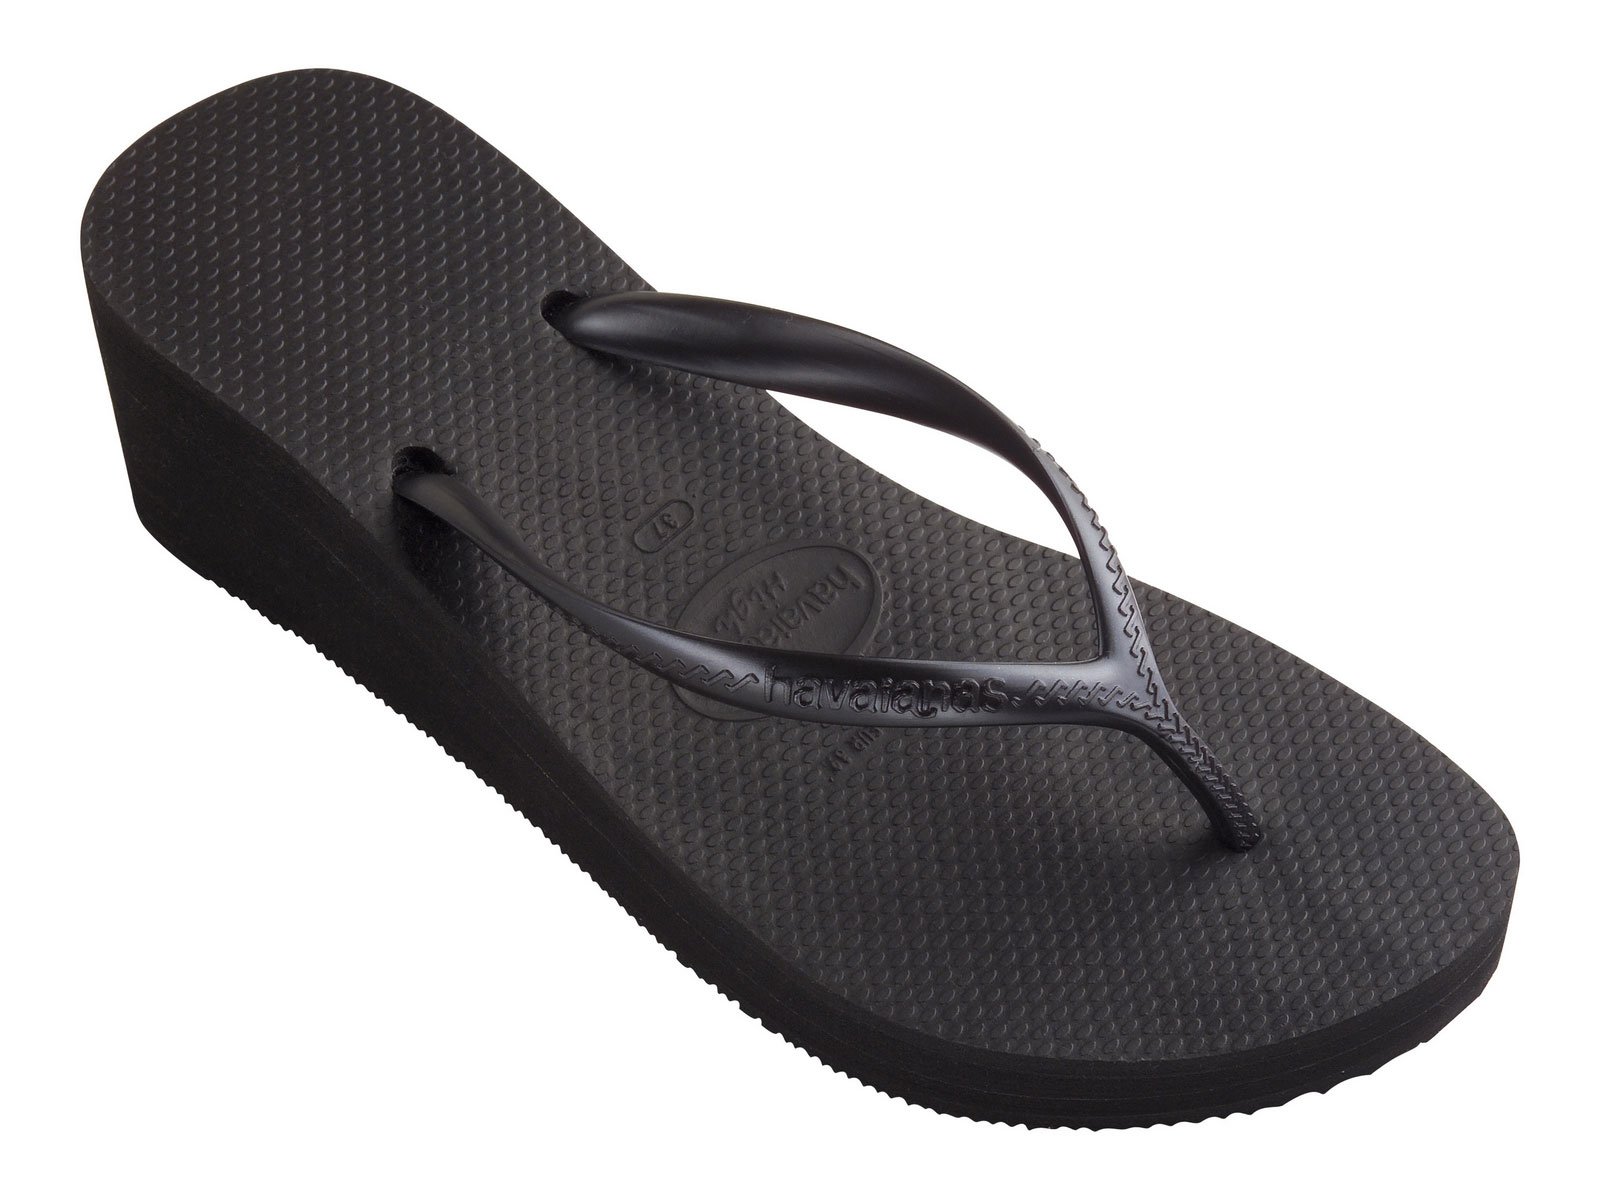 ... backless black thongs from Havaianas have a fashionable wedge heel